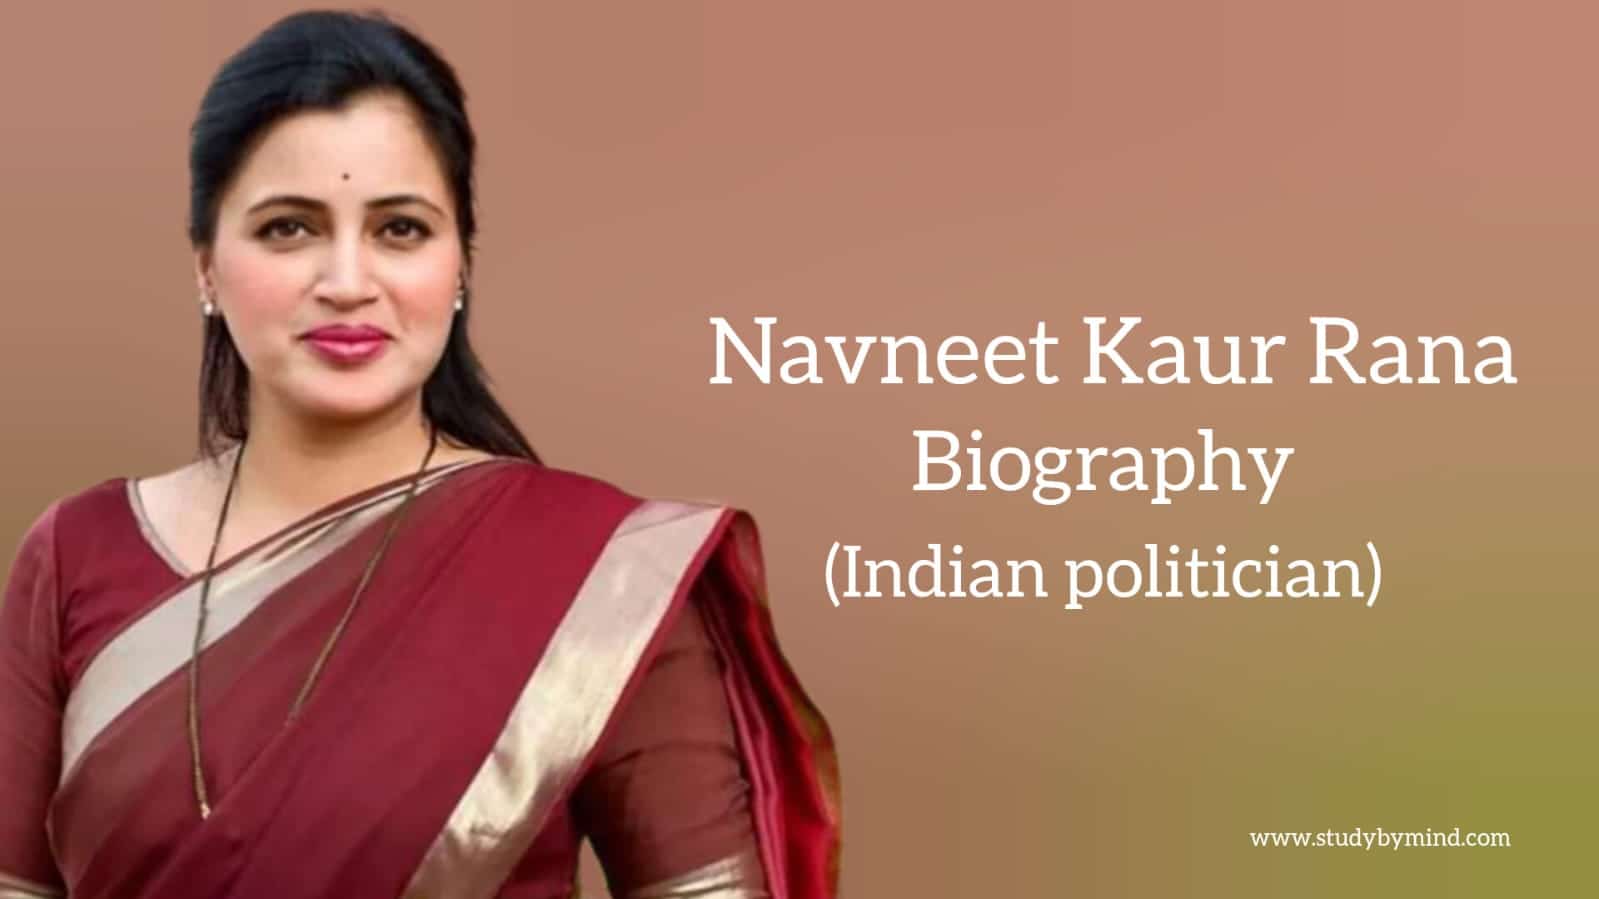 You are currently viewing Navneet kaur rana biography in english (Politician)